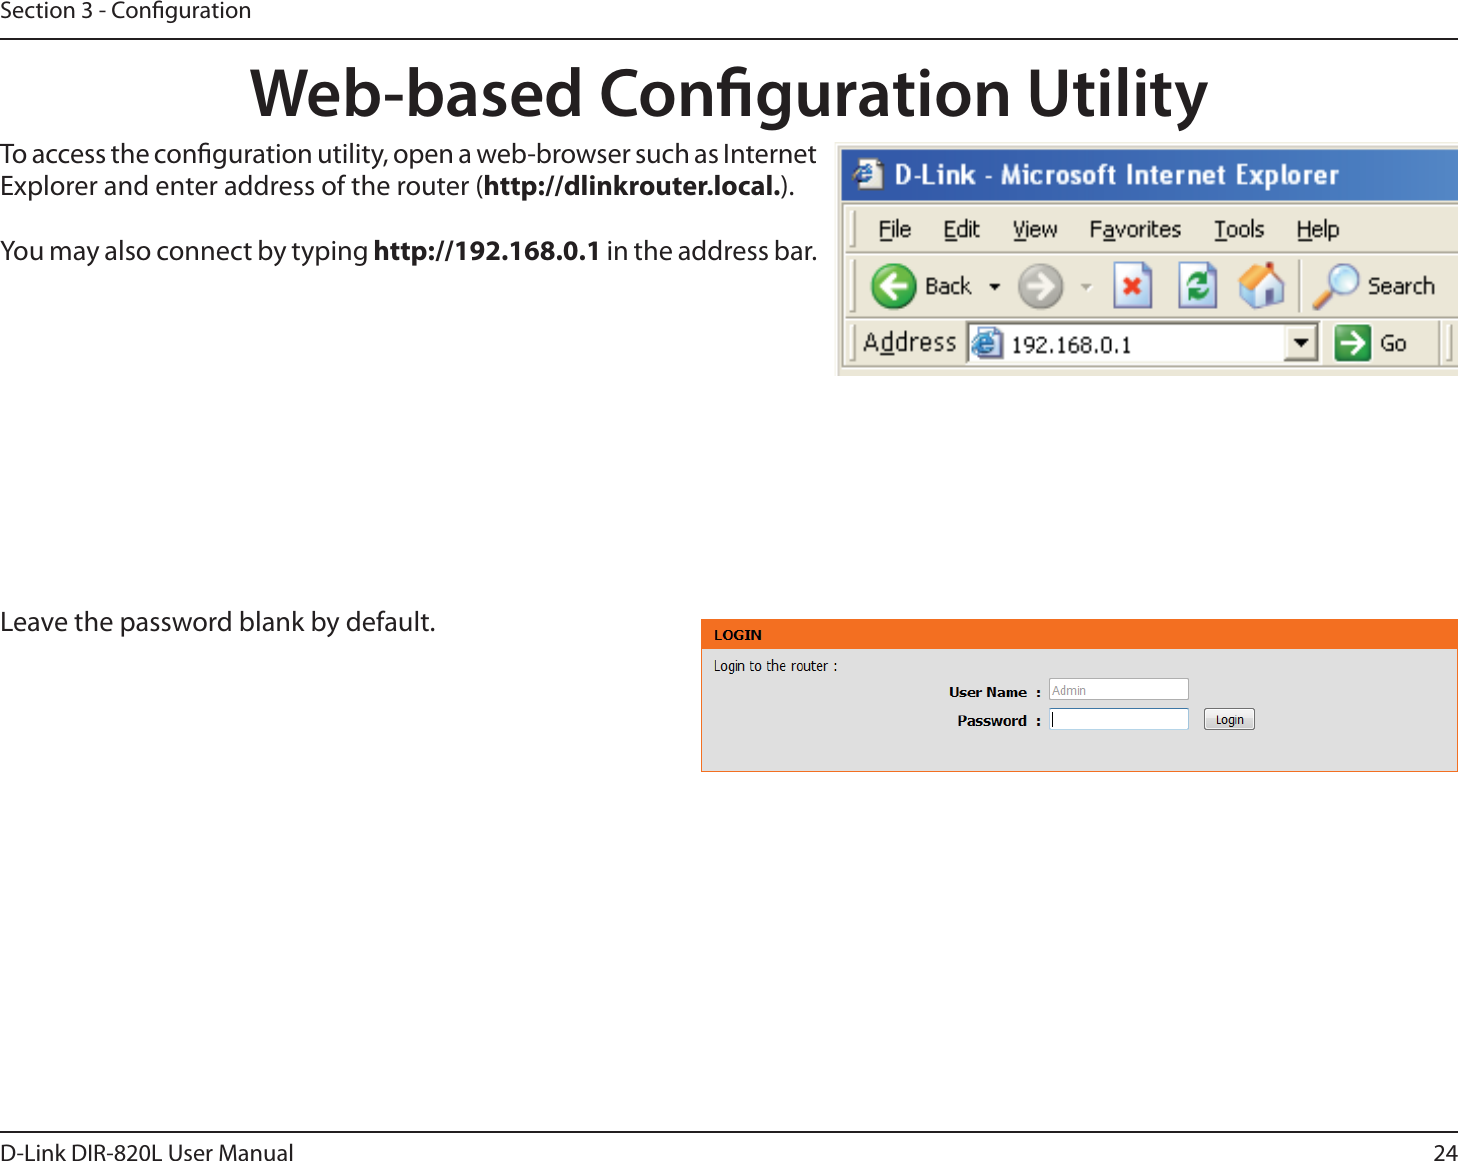 24D-Link DIR-820L User ManualSection 3 - CongurationWeb-based Conguration UtilityLeave the password blank by default.To access the conguration utility, open a web-browser such as Internet Explorer and enter address of the router (http://dlinkrouter.local.).You may also connect by typing http://192.168.0.1 in the address bar.